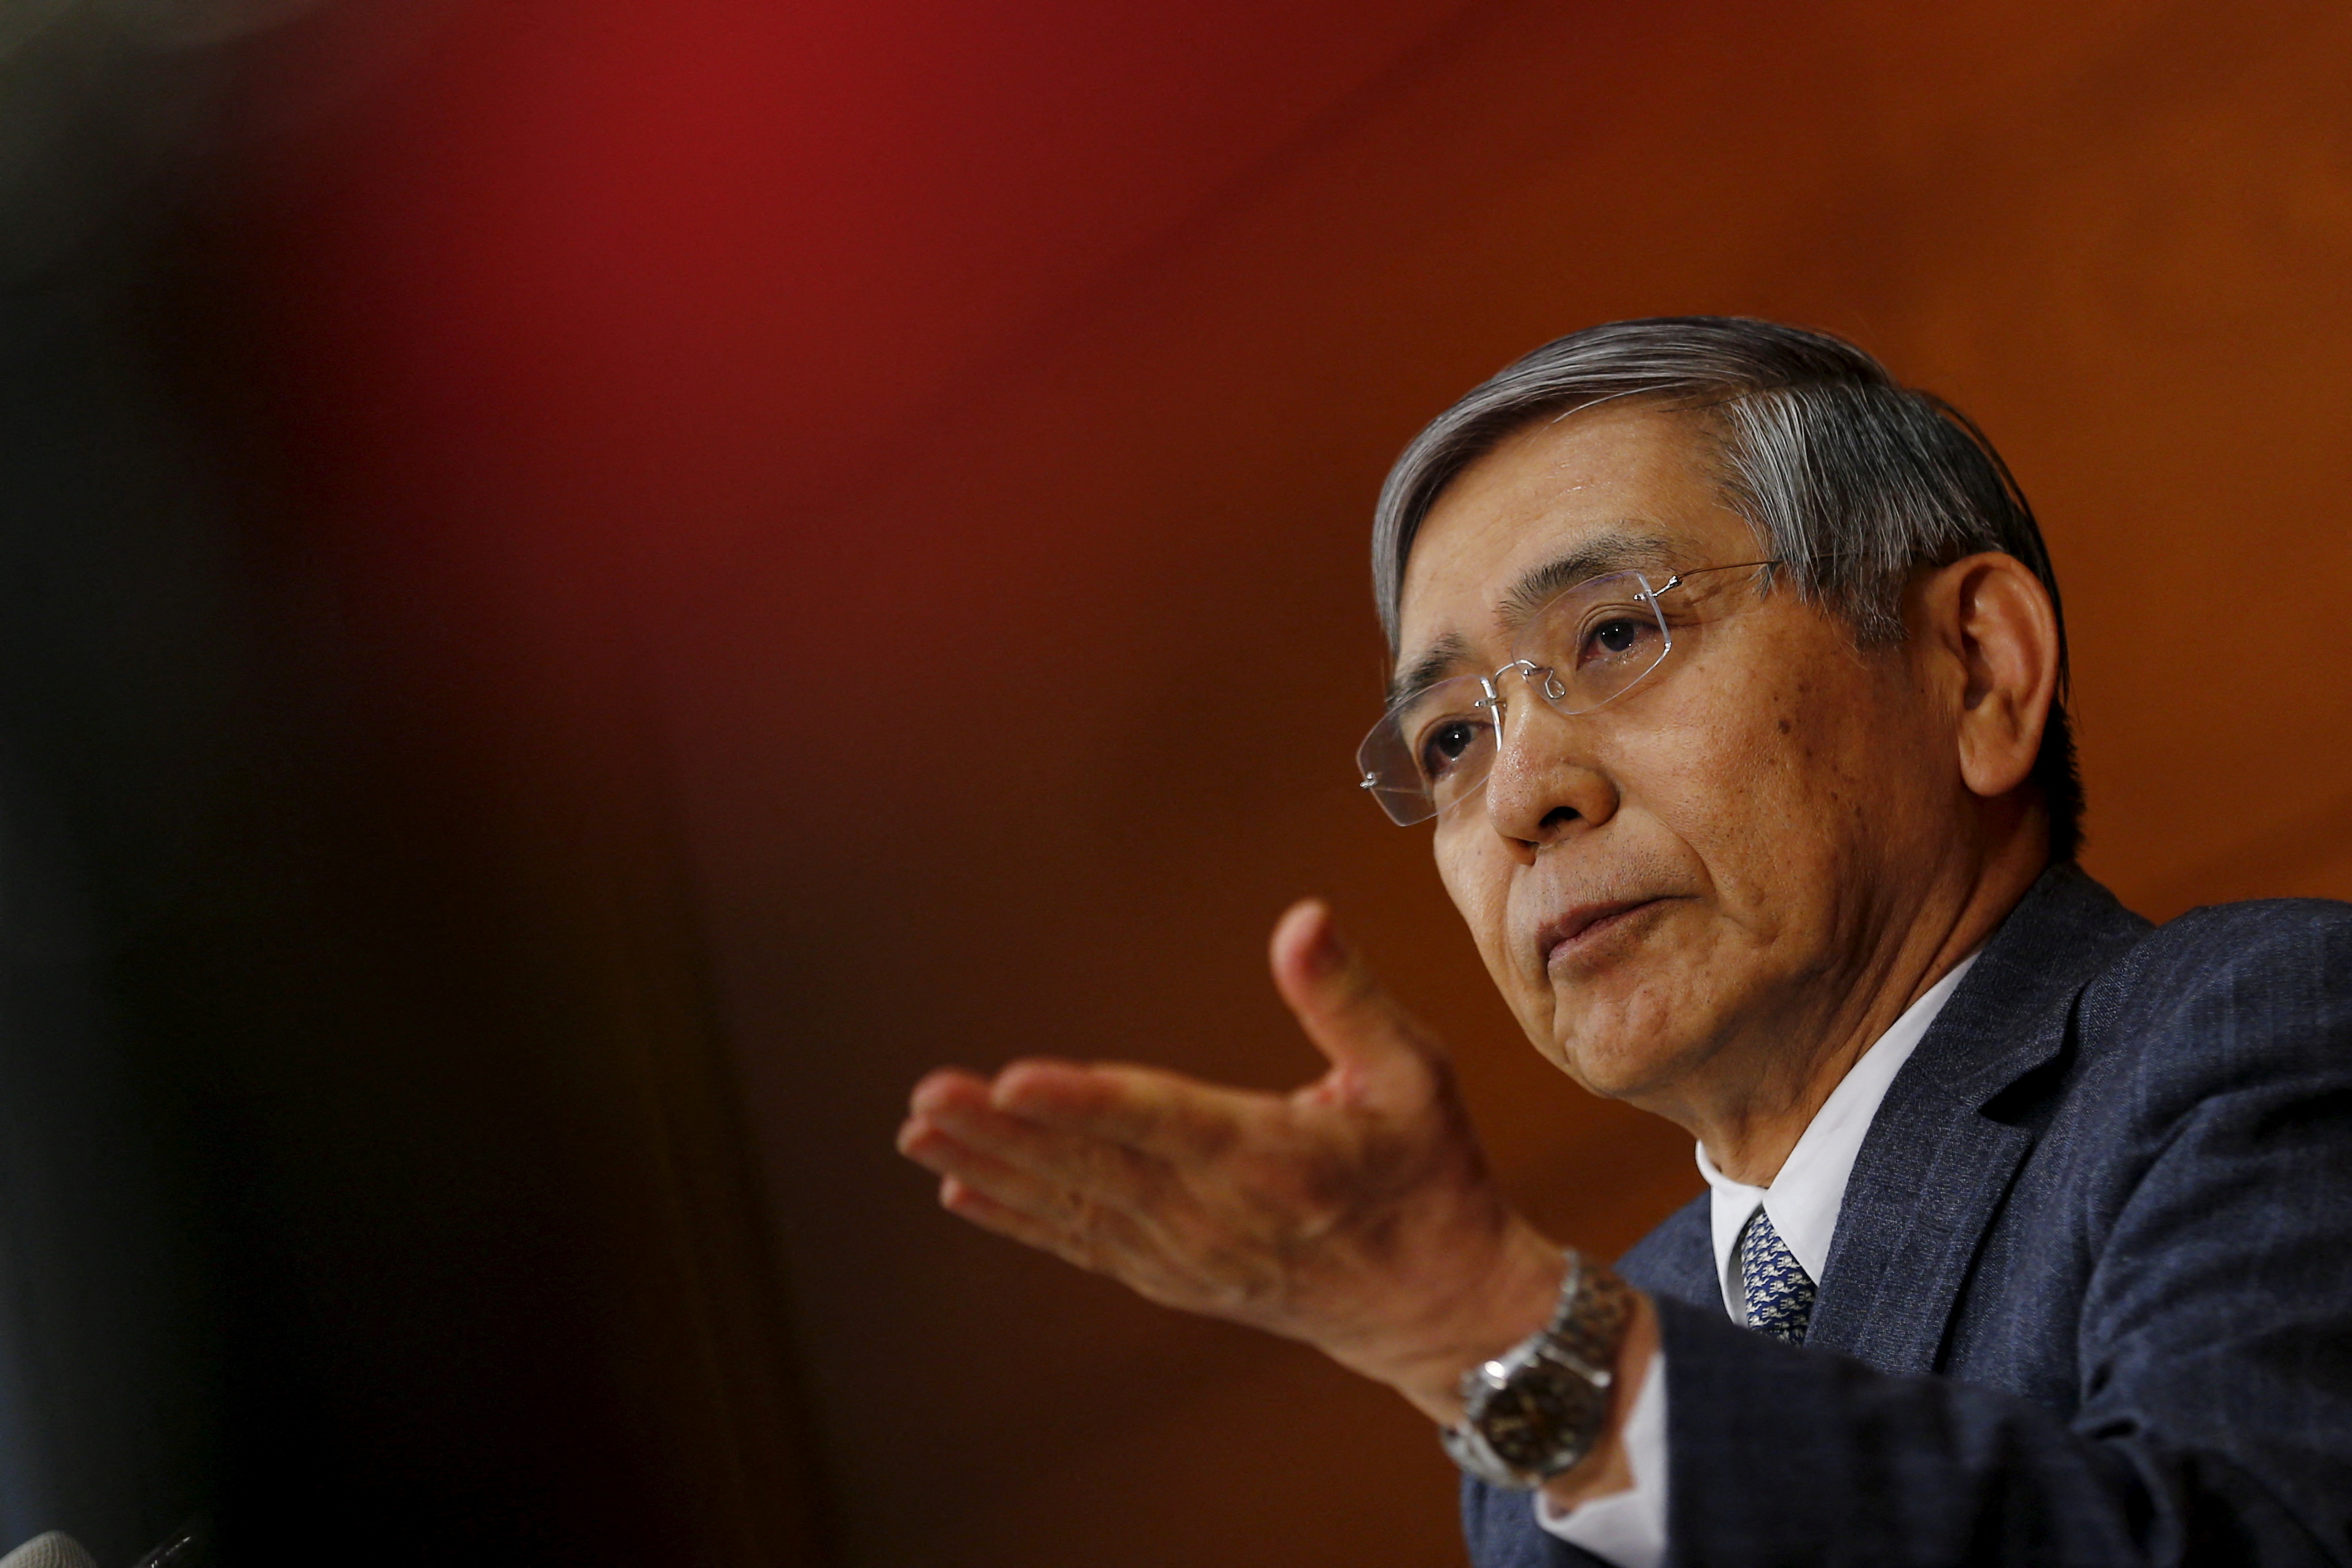 Bank of Japan (BOJ) Governor Haruhiko Kuroda takes a question during a news conference at the BOJ headquarters in Tokyo, October 30, 2015.  REUTERS/Thomas Peter/File Photo